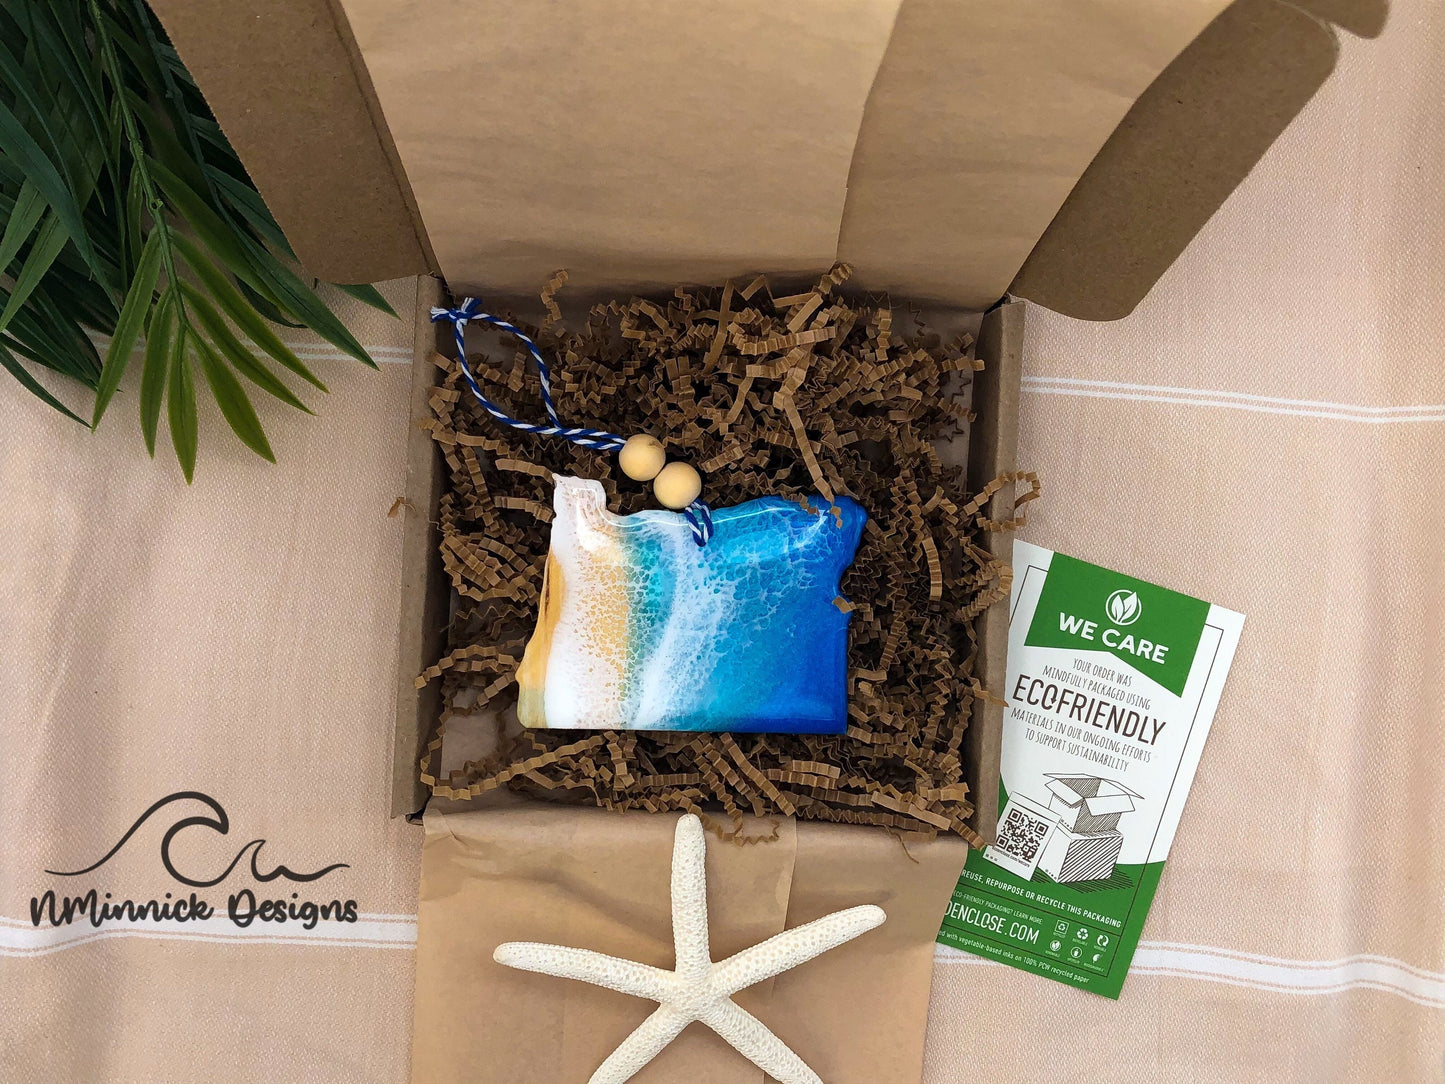 Oregon State Beach Ornament packaged in ecofriendly plastic free materials with recyclable box, tissue paper and paper shred.